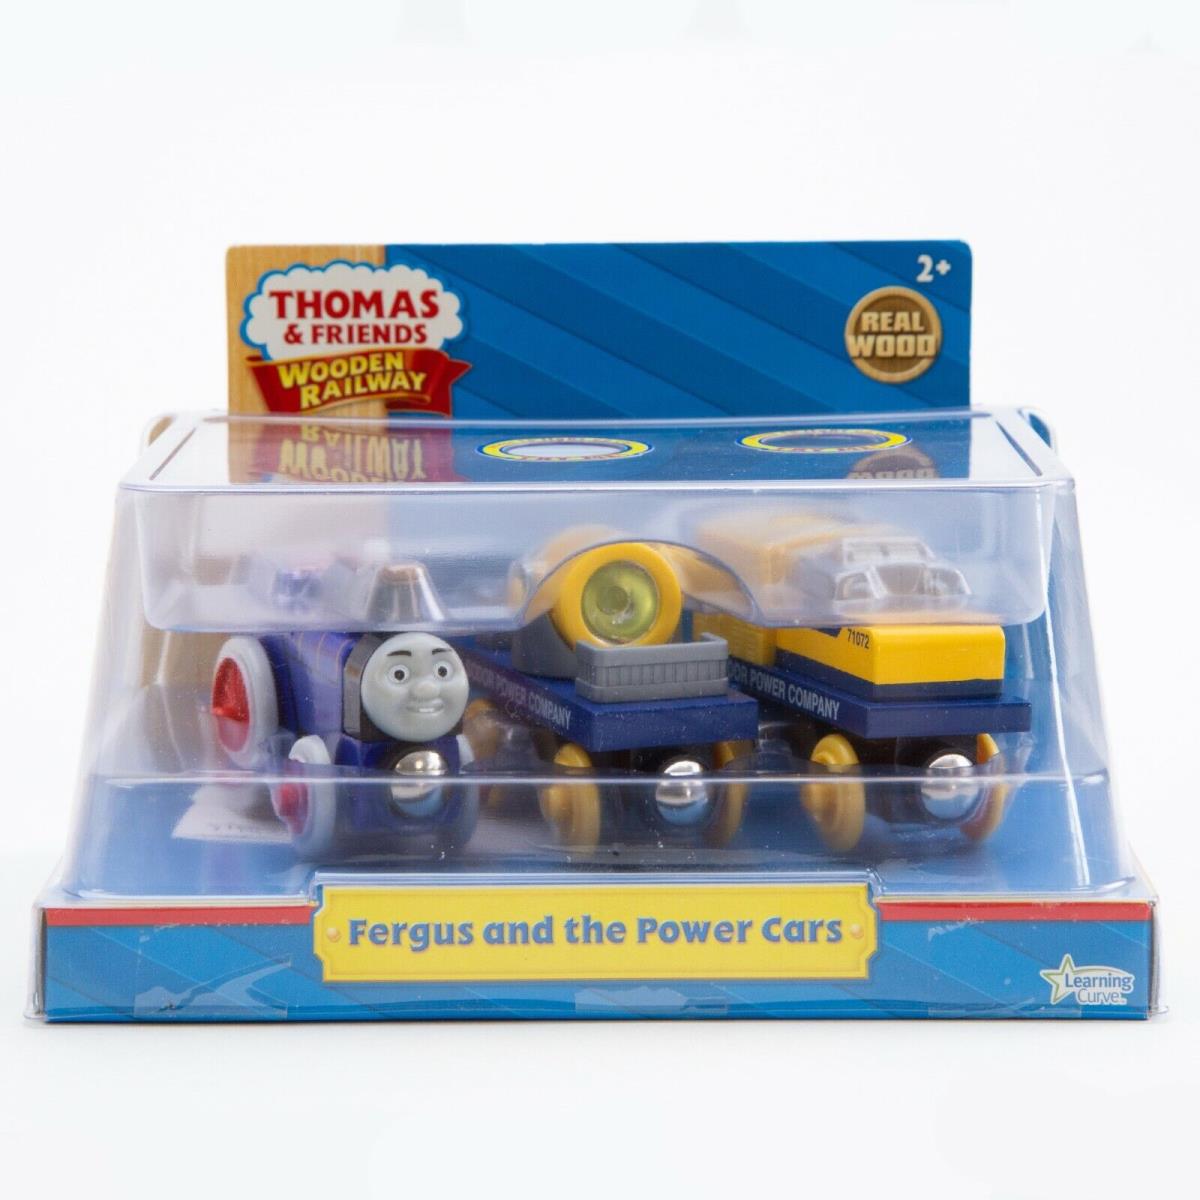 Fergus and The Power Cars Wooden Wood Train Toy Thomas Friends